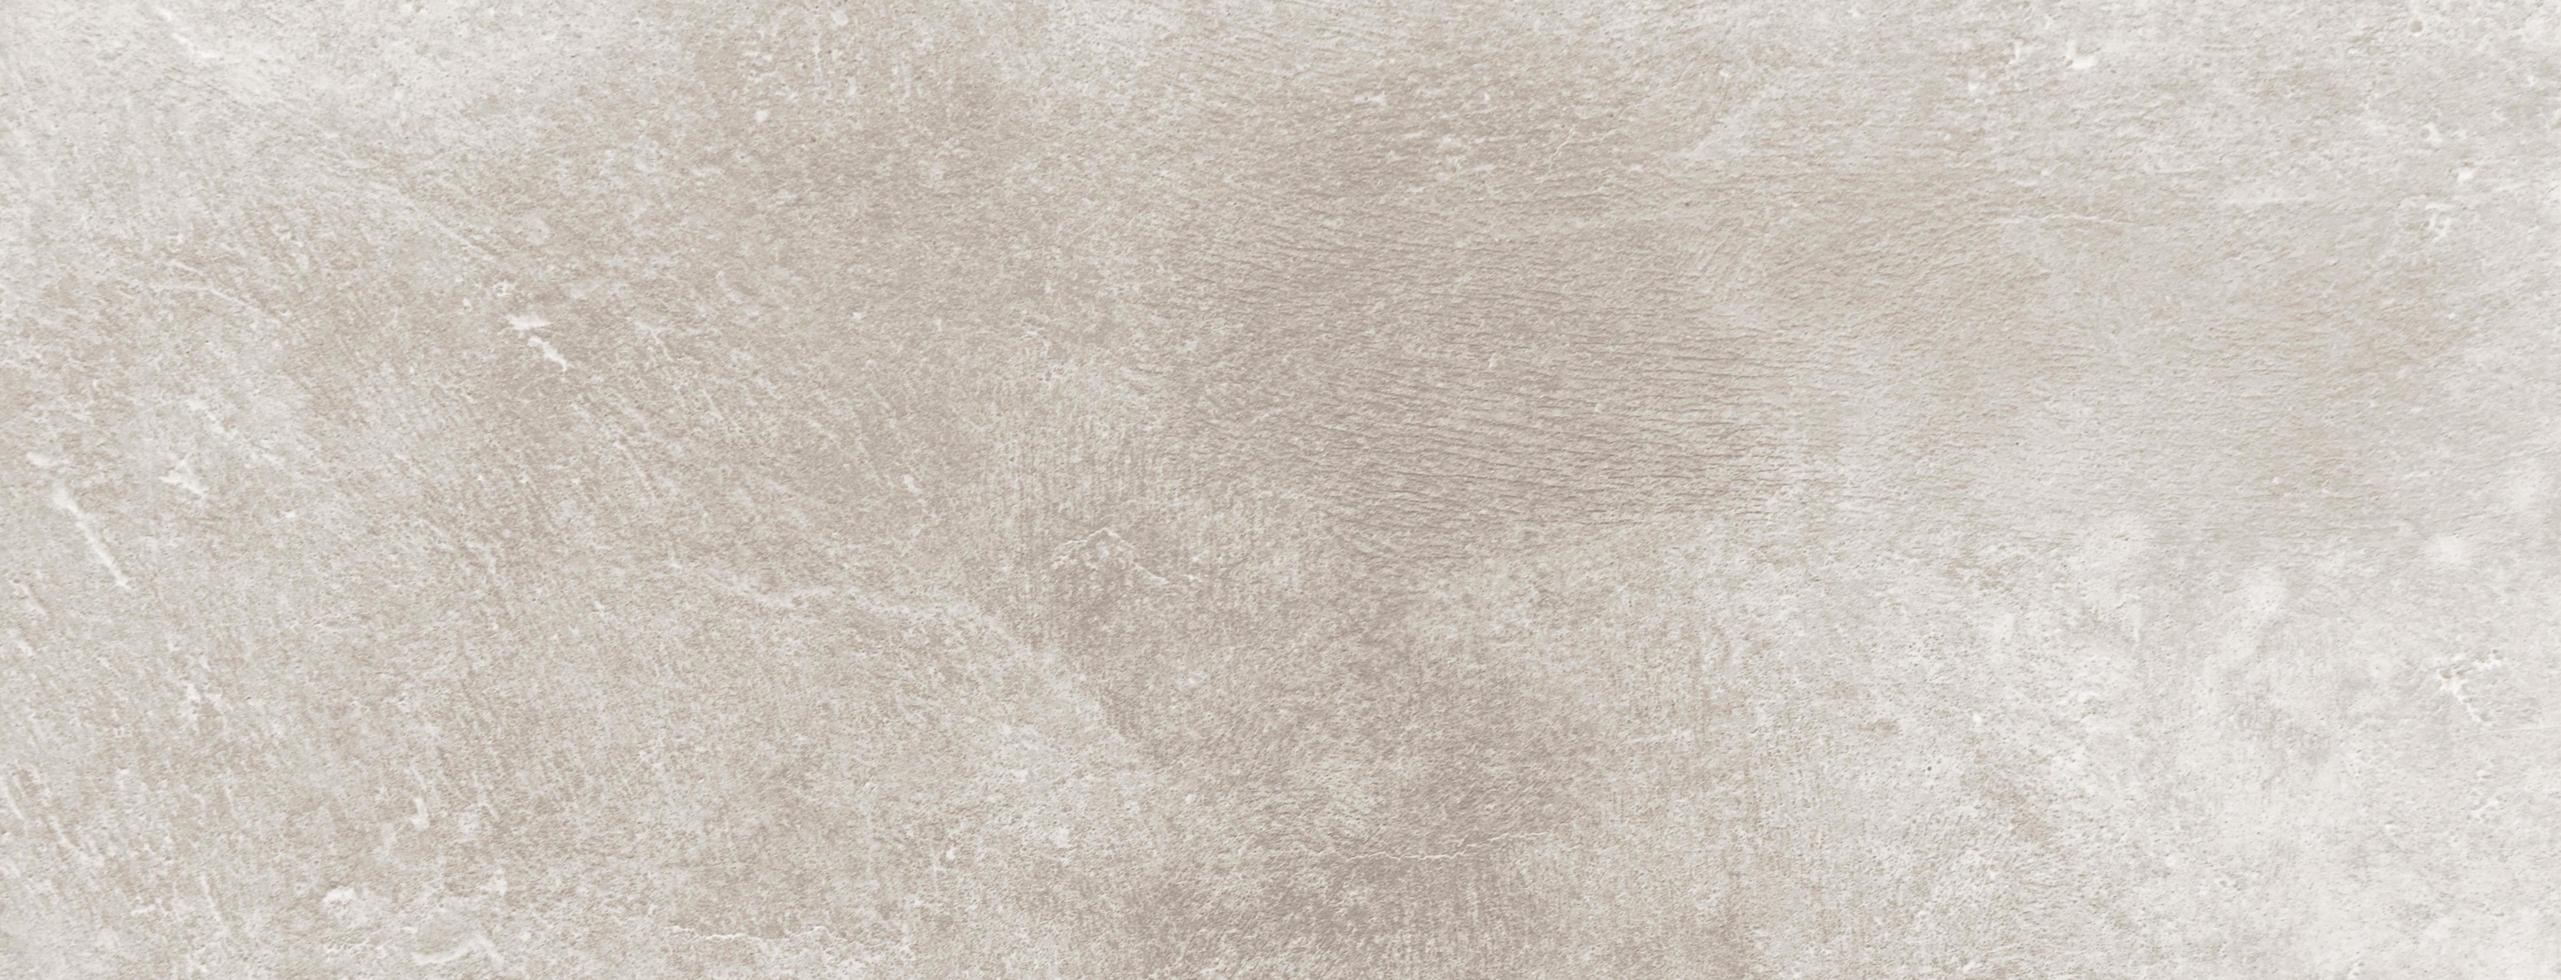 Beautiful cement background pastel color. beige concrete texture. High Resolution grunge horizontal background photo